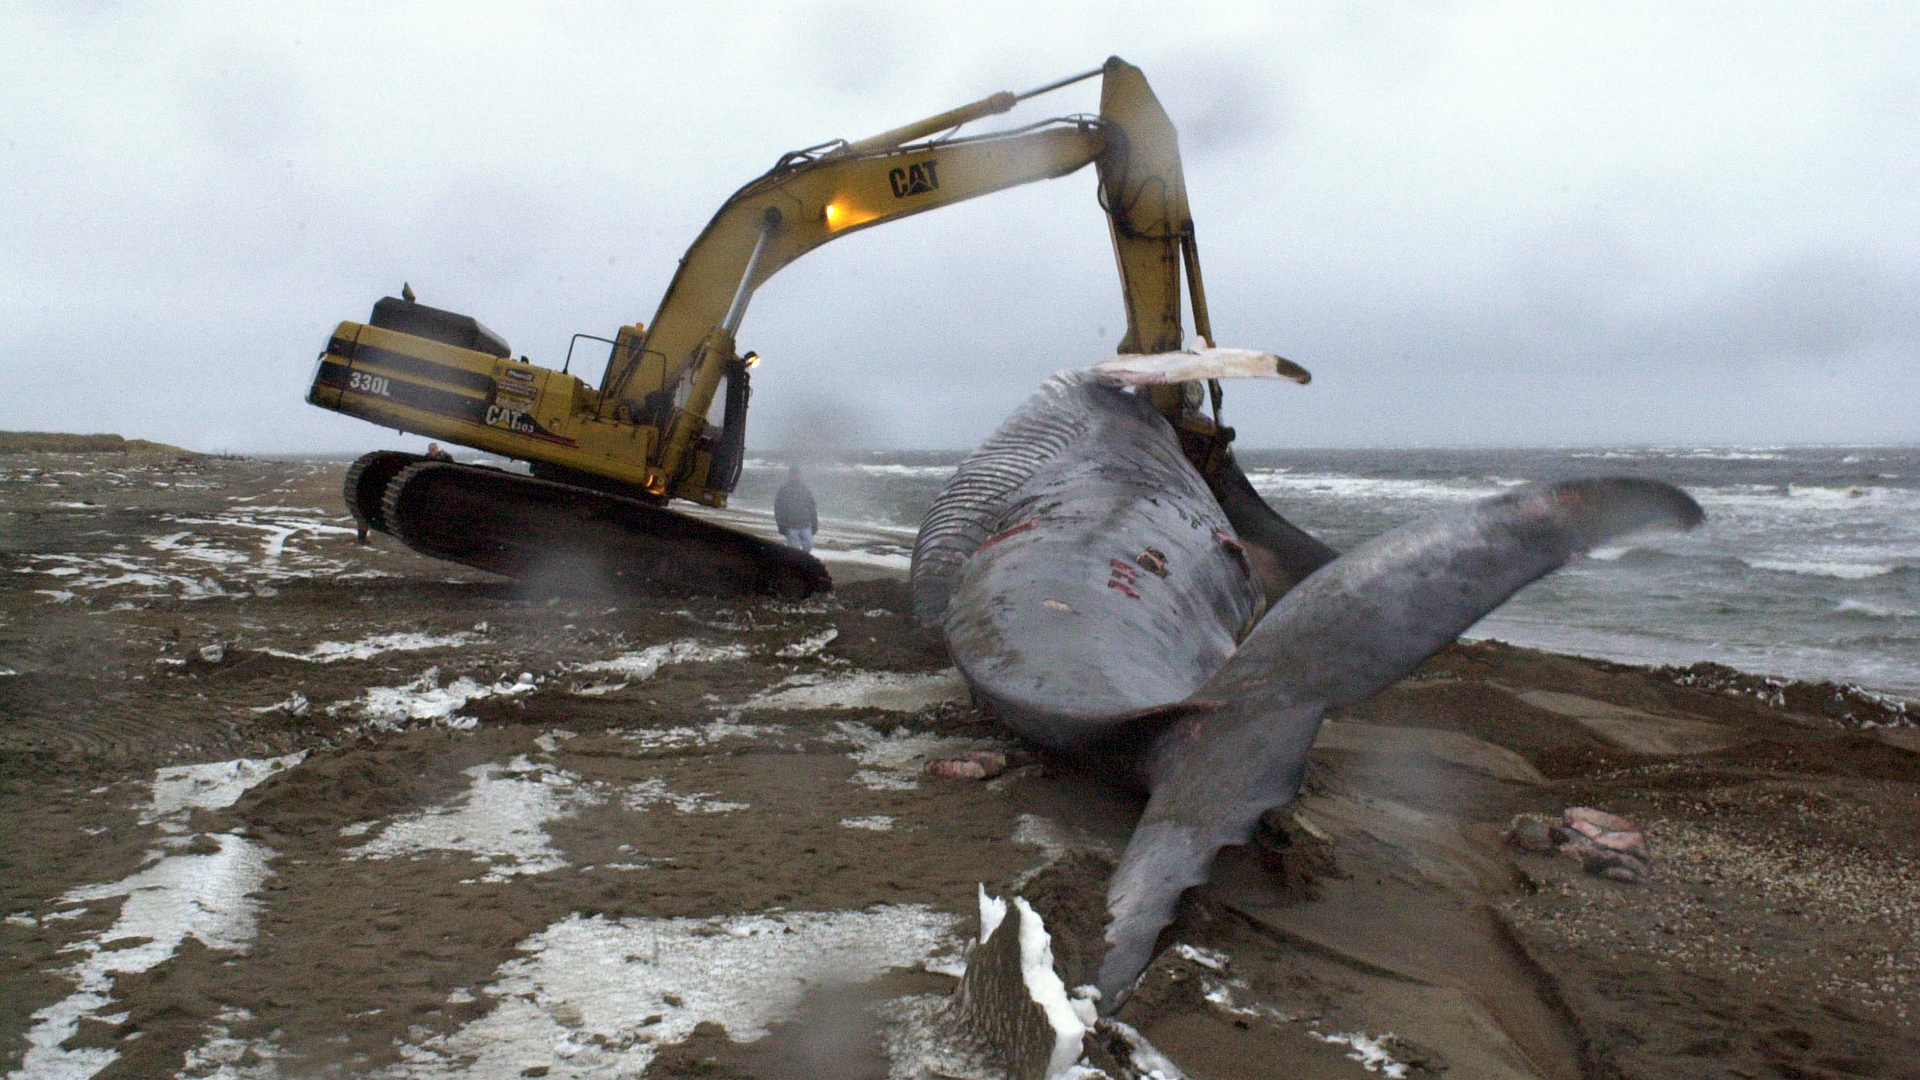 A crane attempts to turn the whale over. The crane begins to tip due to the weight of the animal.